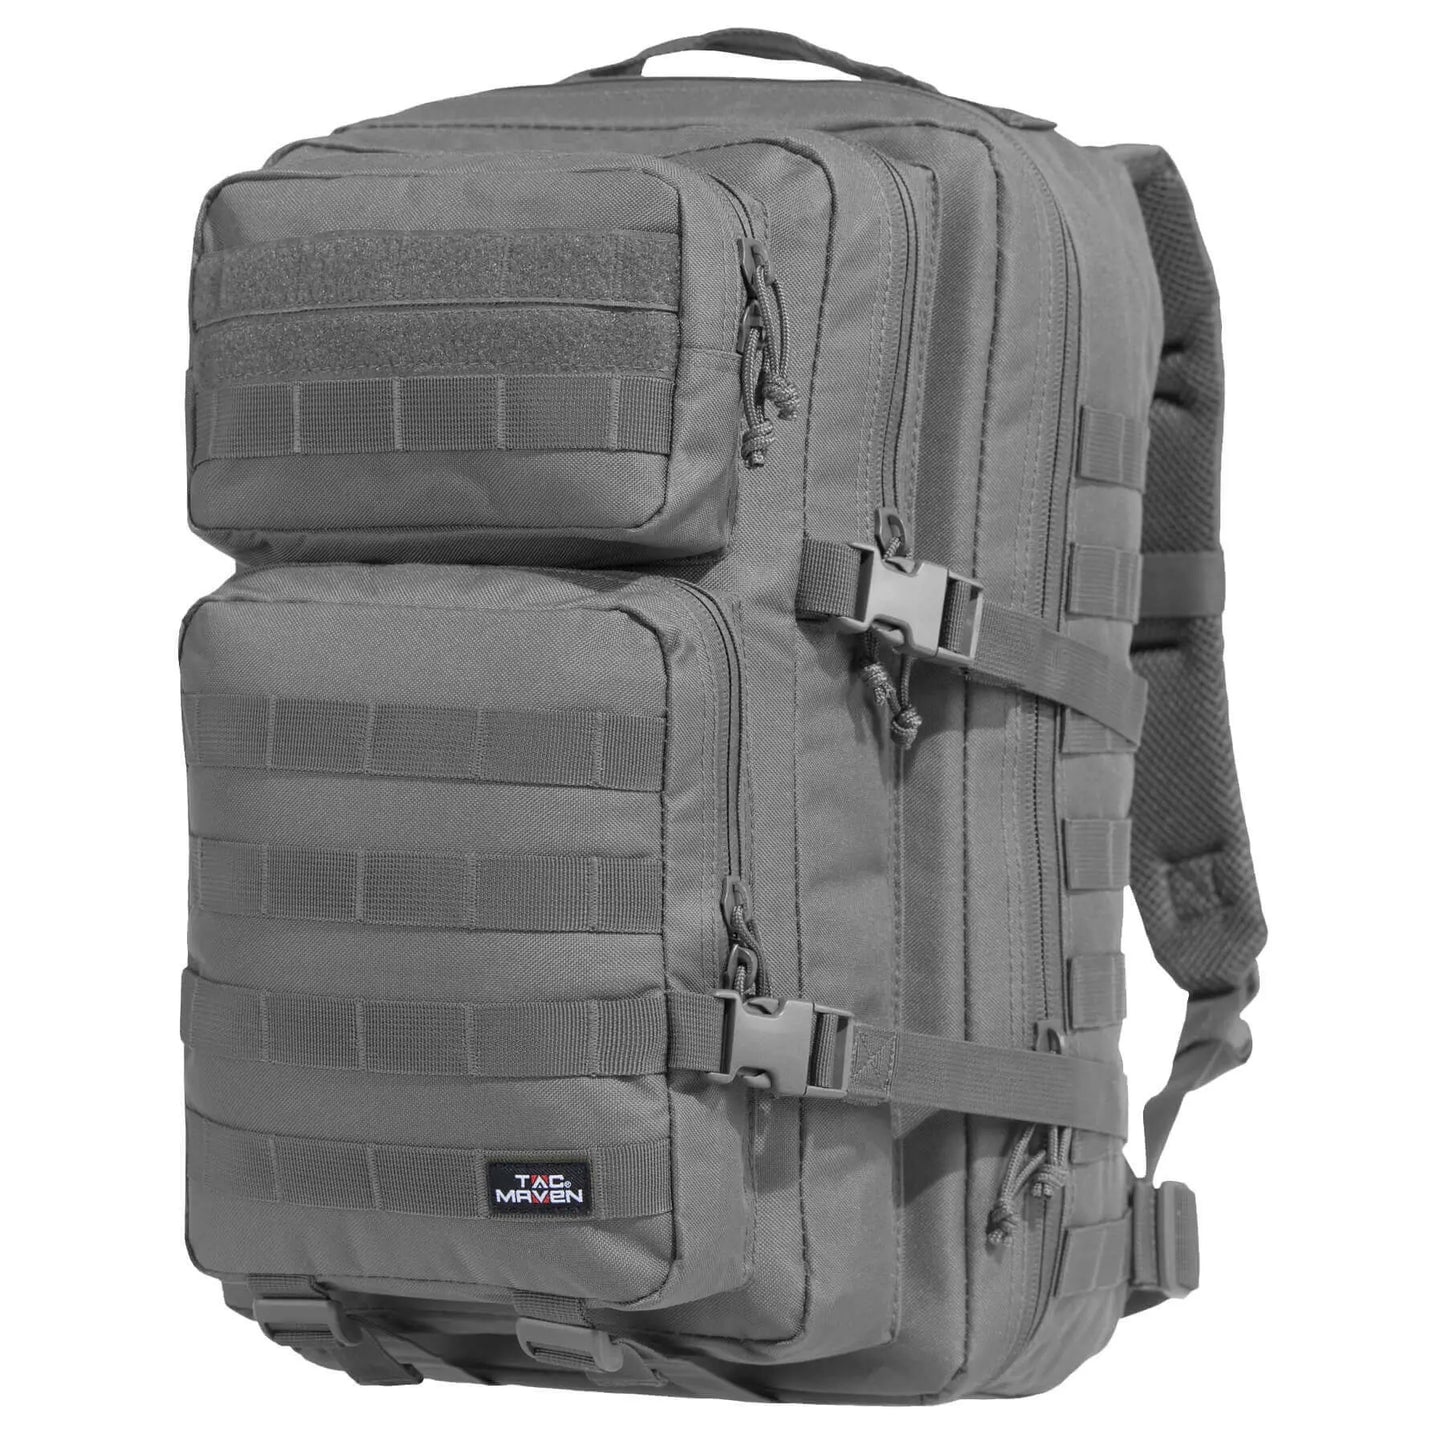 Assault Large Backpack - Wolf Grey NSO Gear Backpack